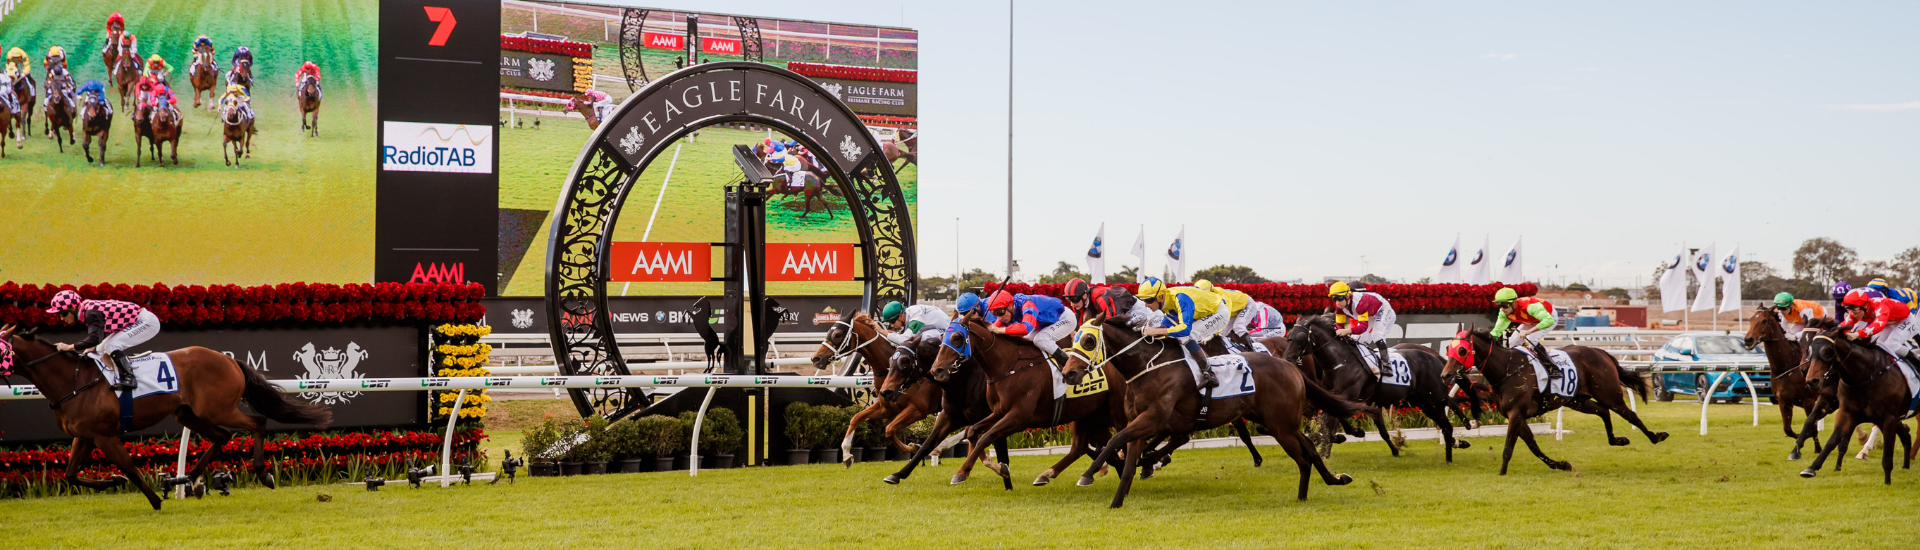 Best Moments at Eagle Farm competition | Brisbane Racing Club